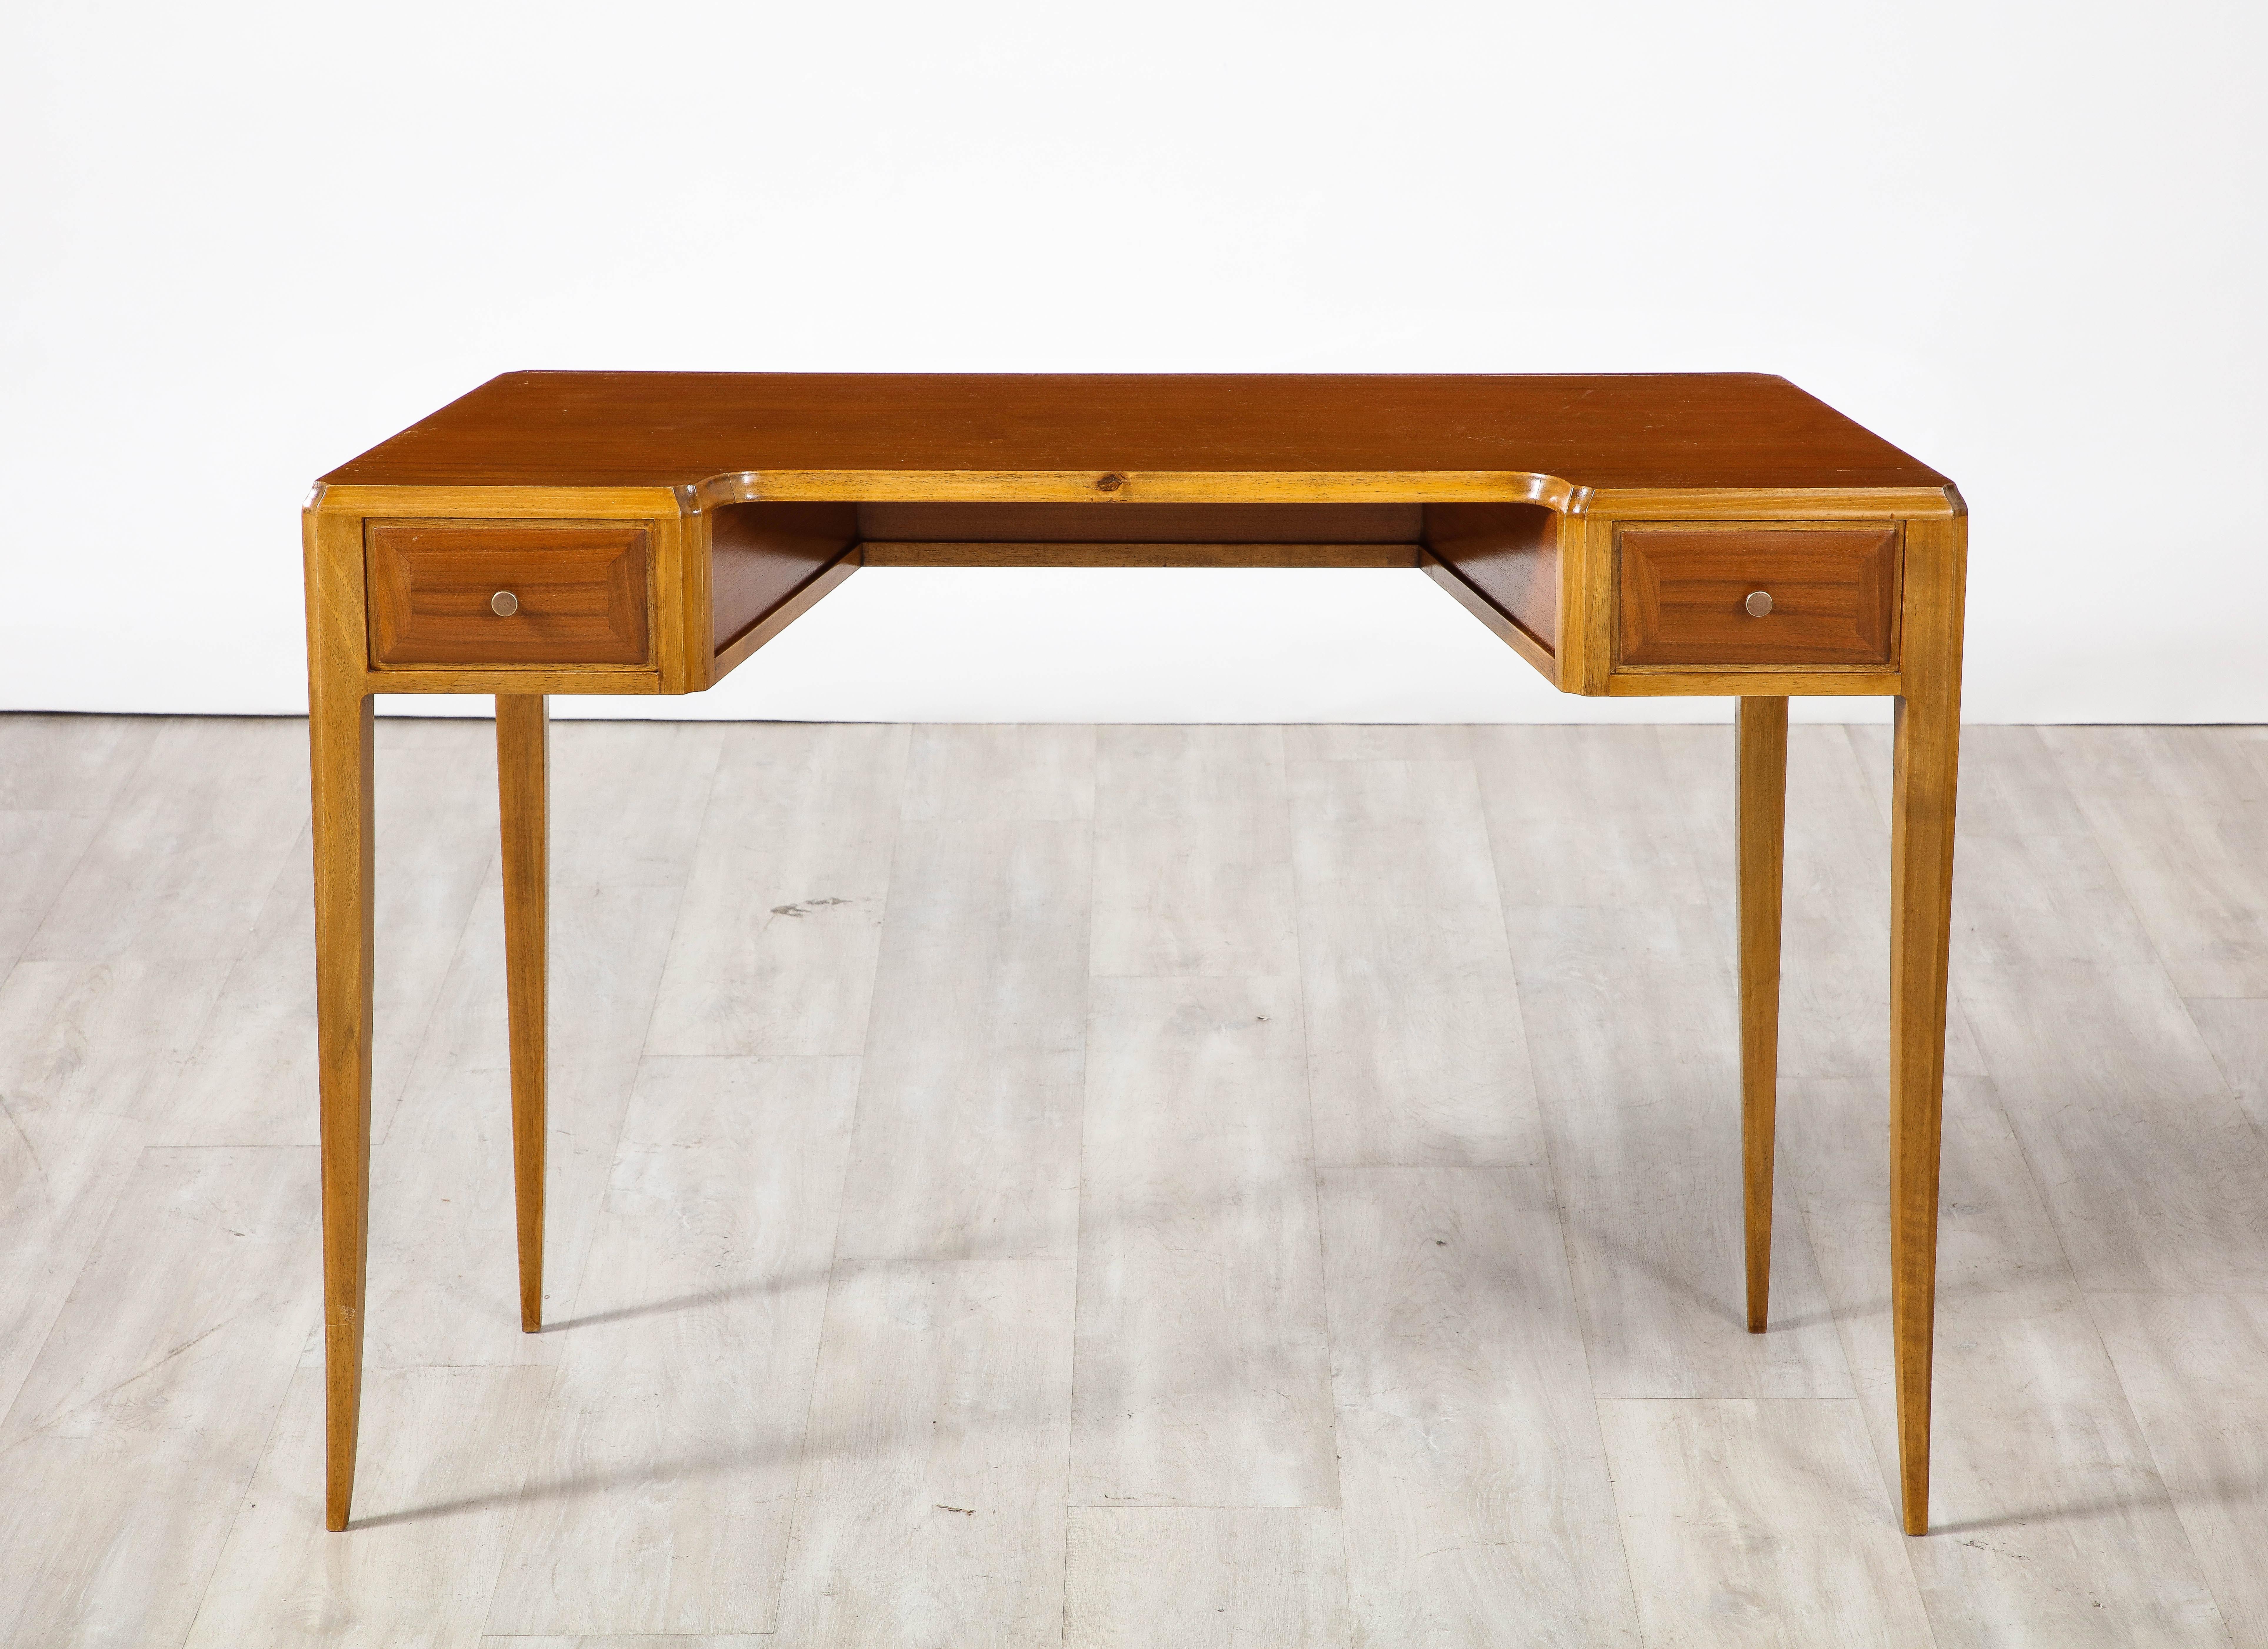 A fine Italian maple wood writing desk, with two small drawers on the front apron; elegantly tapered legs; the whole finished all around so may be placed anywhere in a room.  Highly sculptural and classic. 

Italy, circa late 1940's 
Size: 29